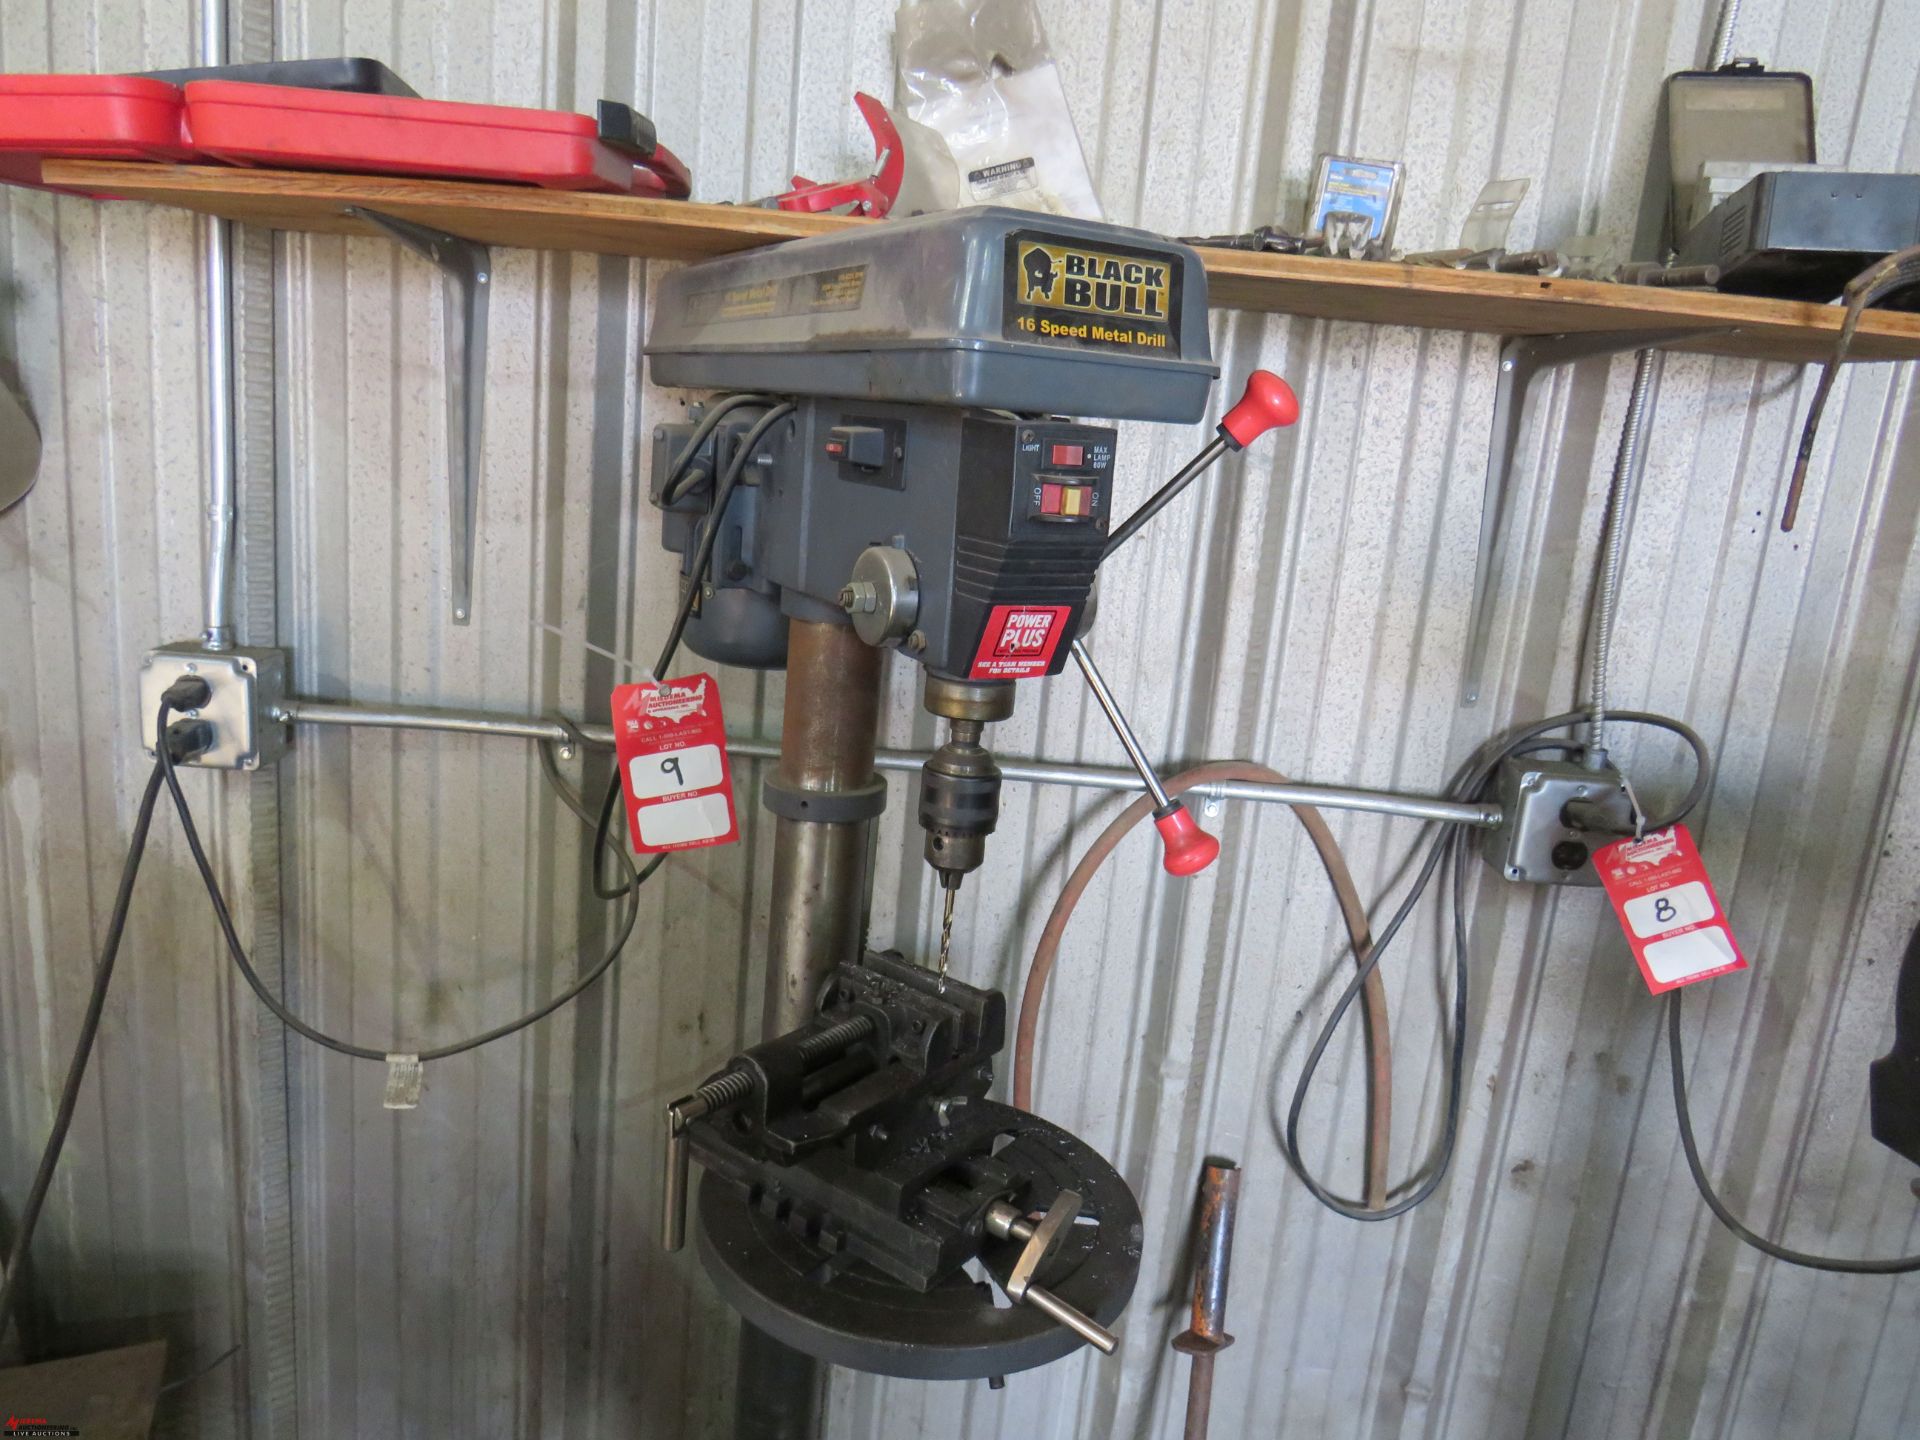 BLACK BULL 16-SPEED METAL DRILL PRESS WITH VISE, 110v